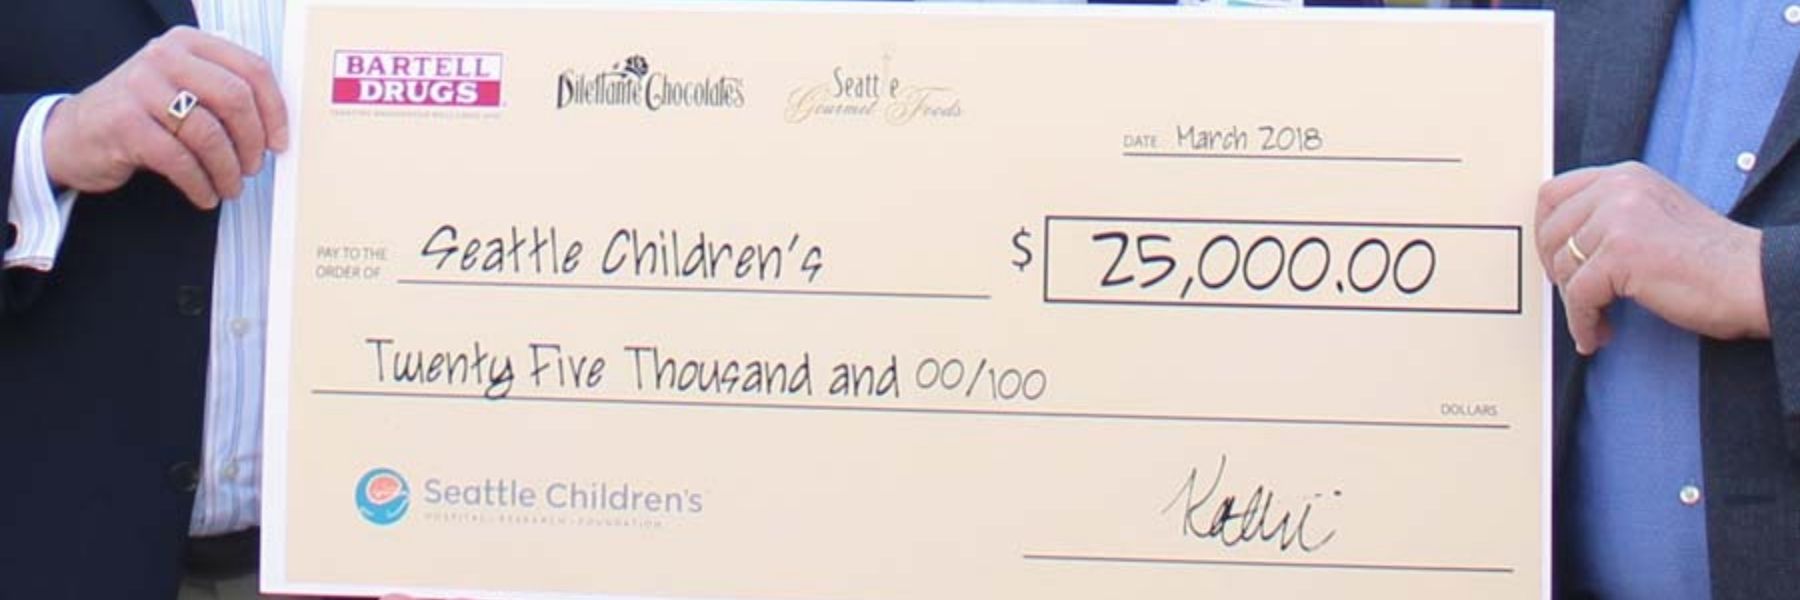 Dilettante Chocolates 25,000 check for Seattle Children's Hospital